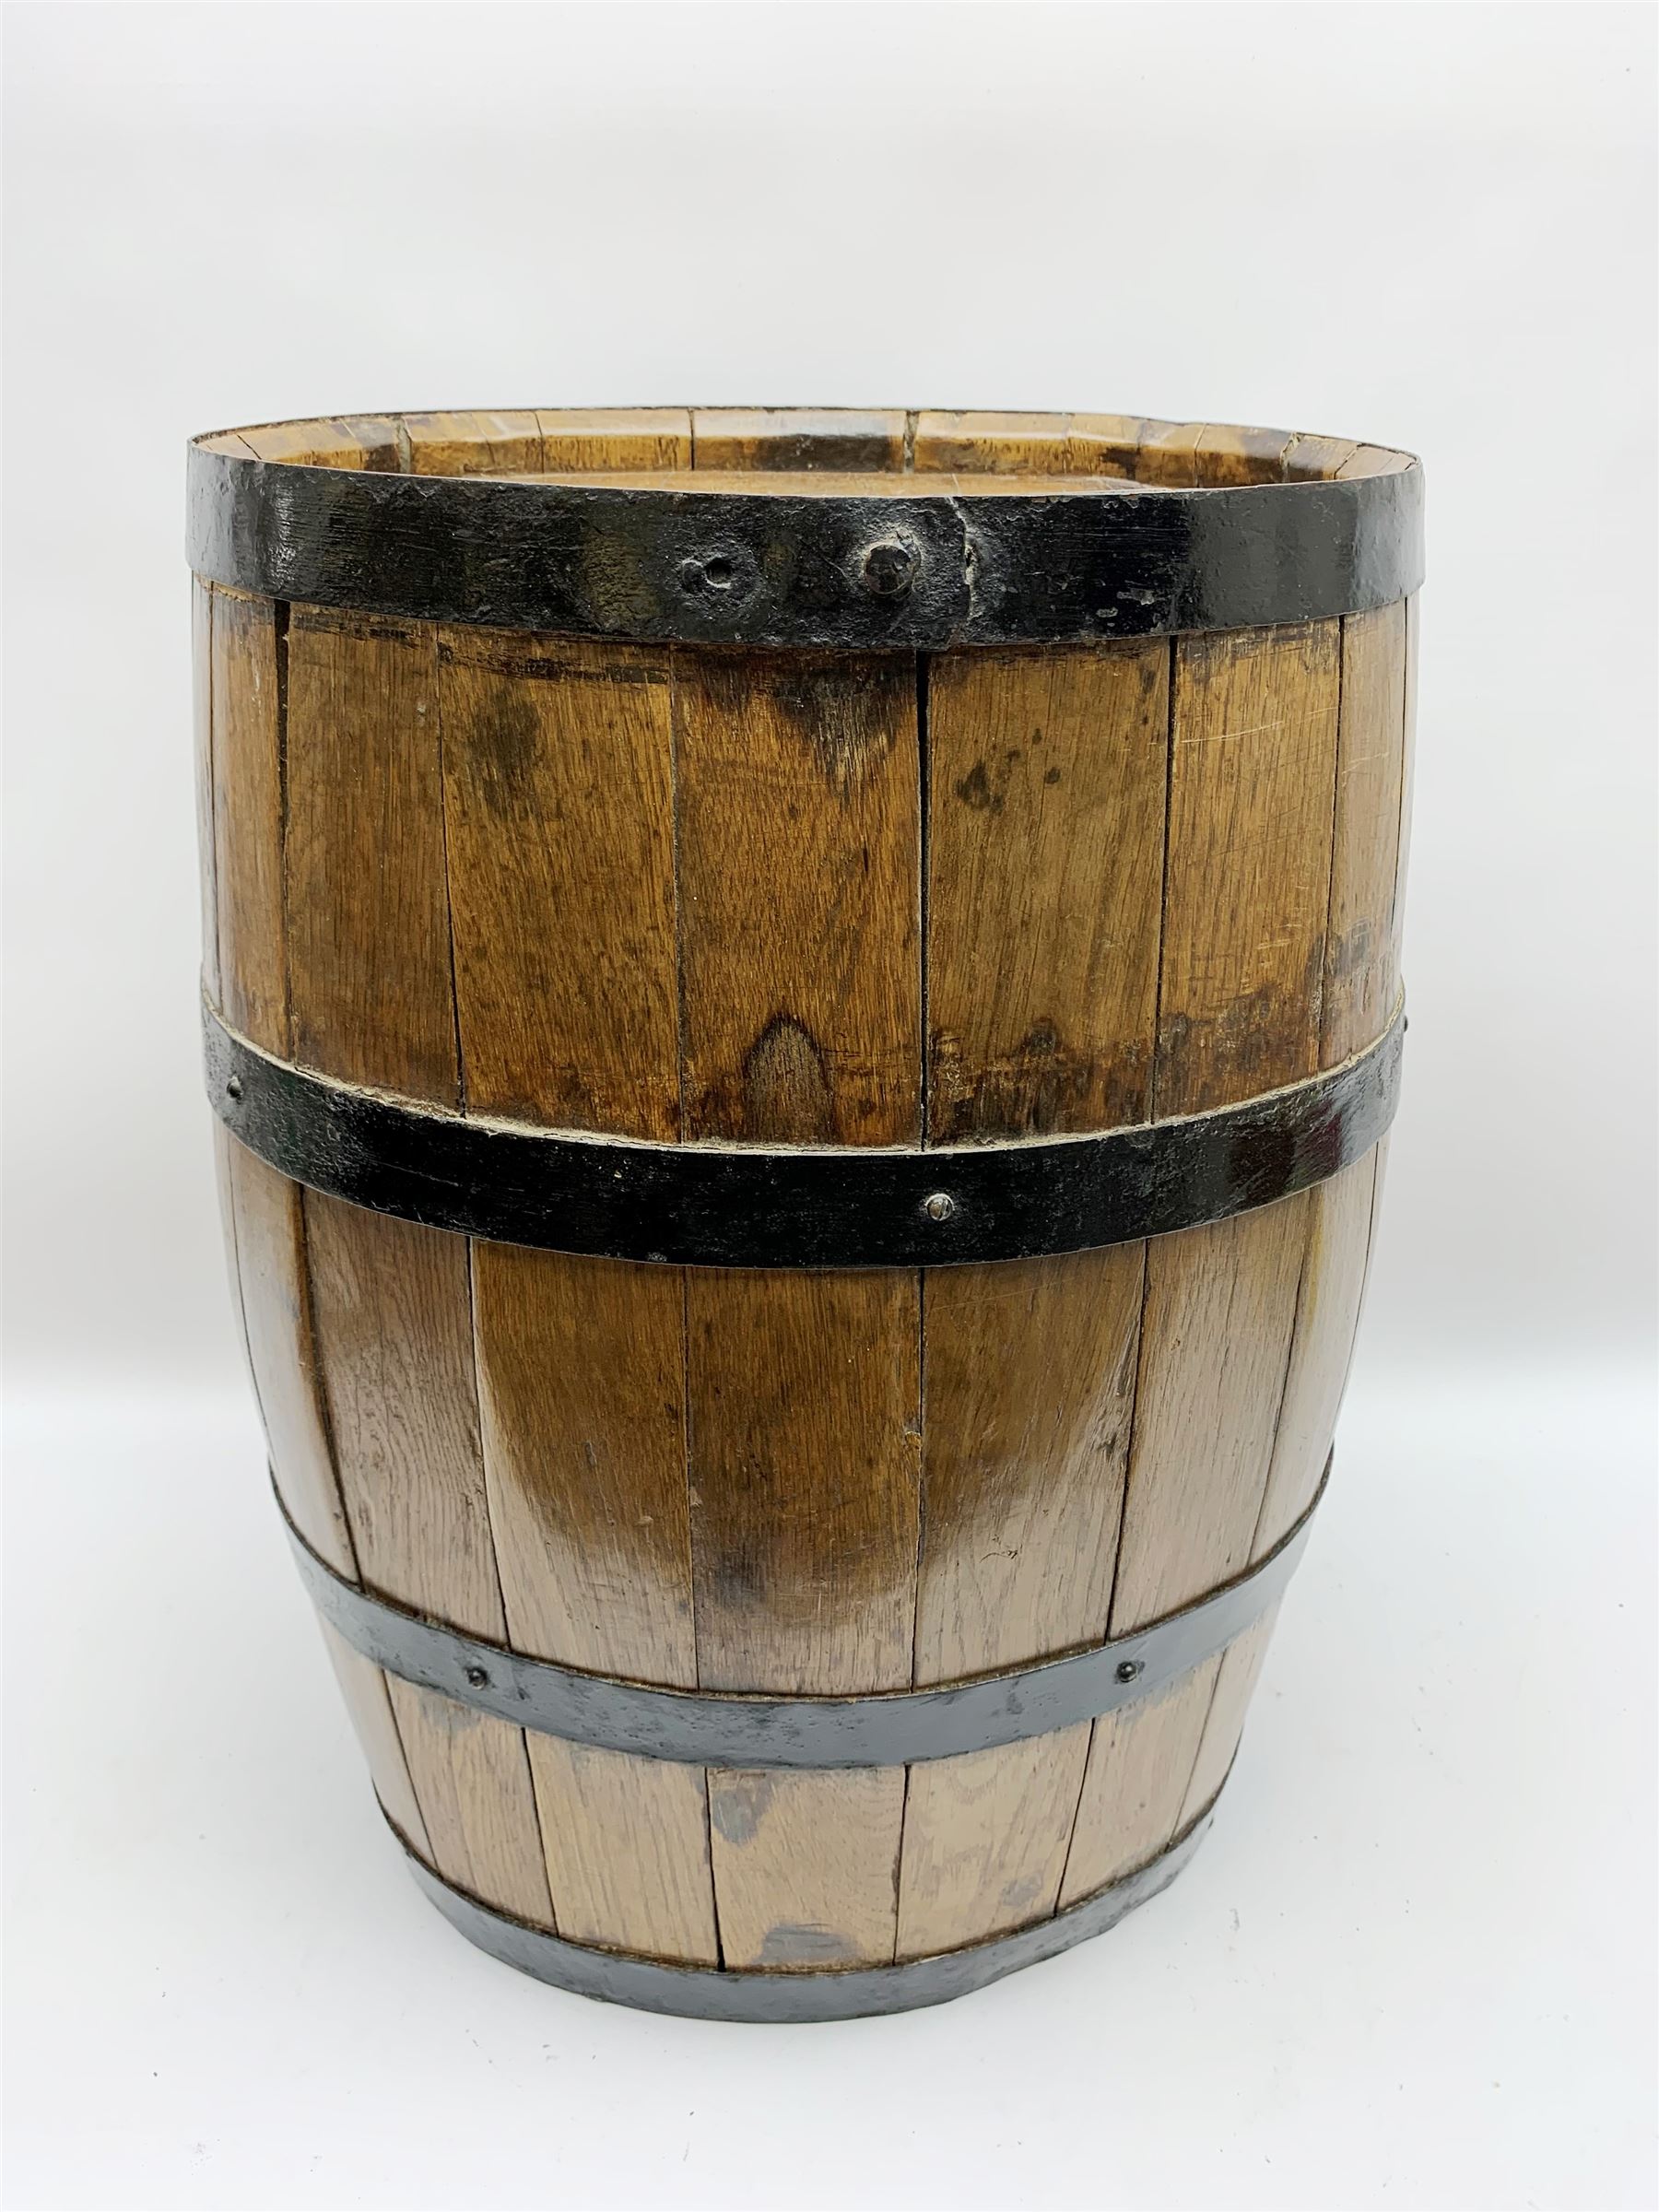 19th century oak and metal bound coopered barrel - Image 4 of 5